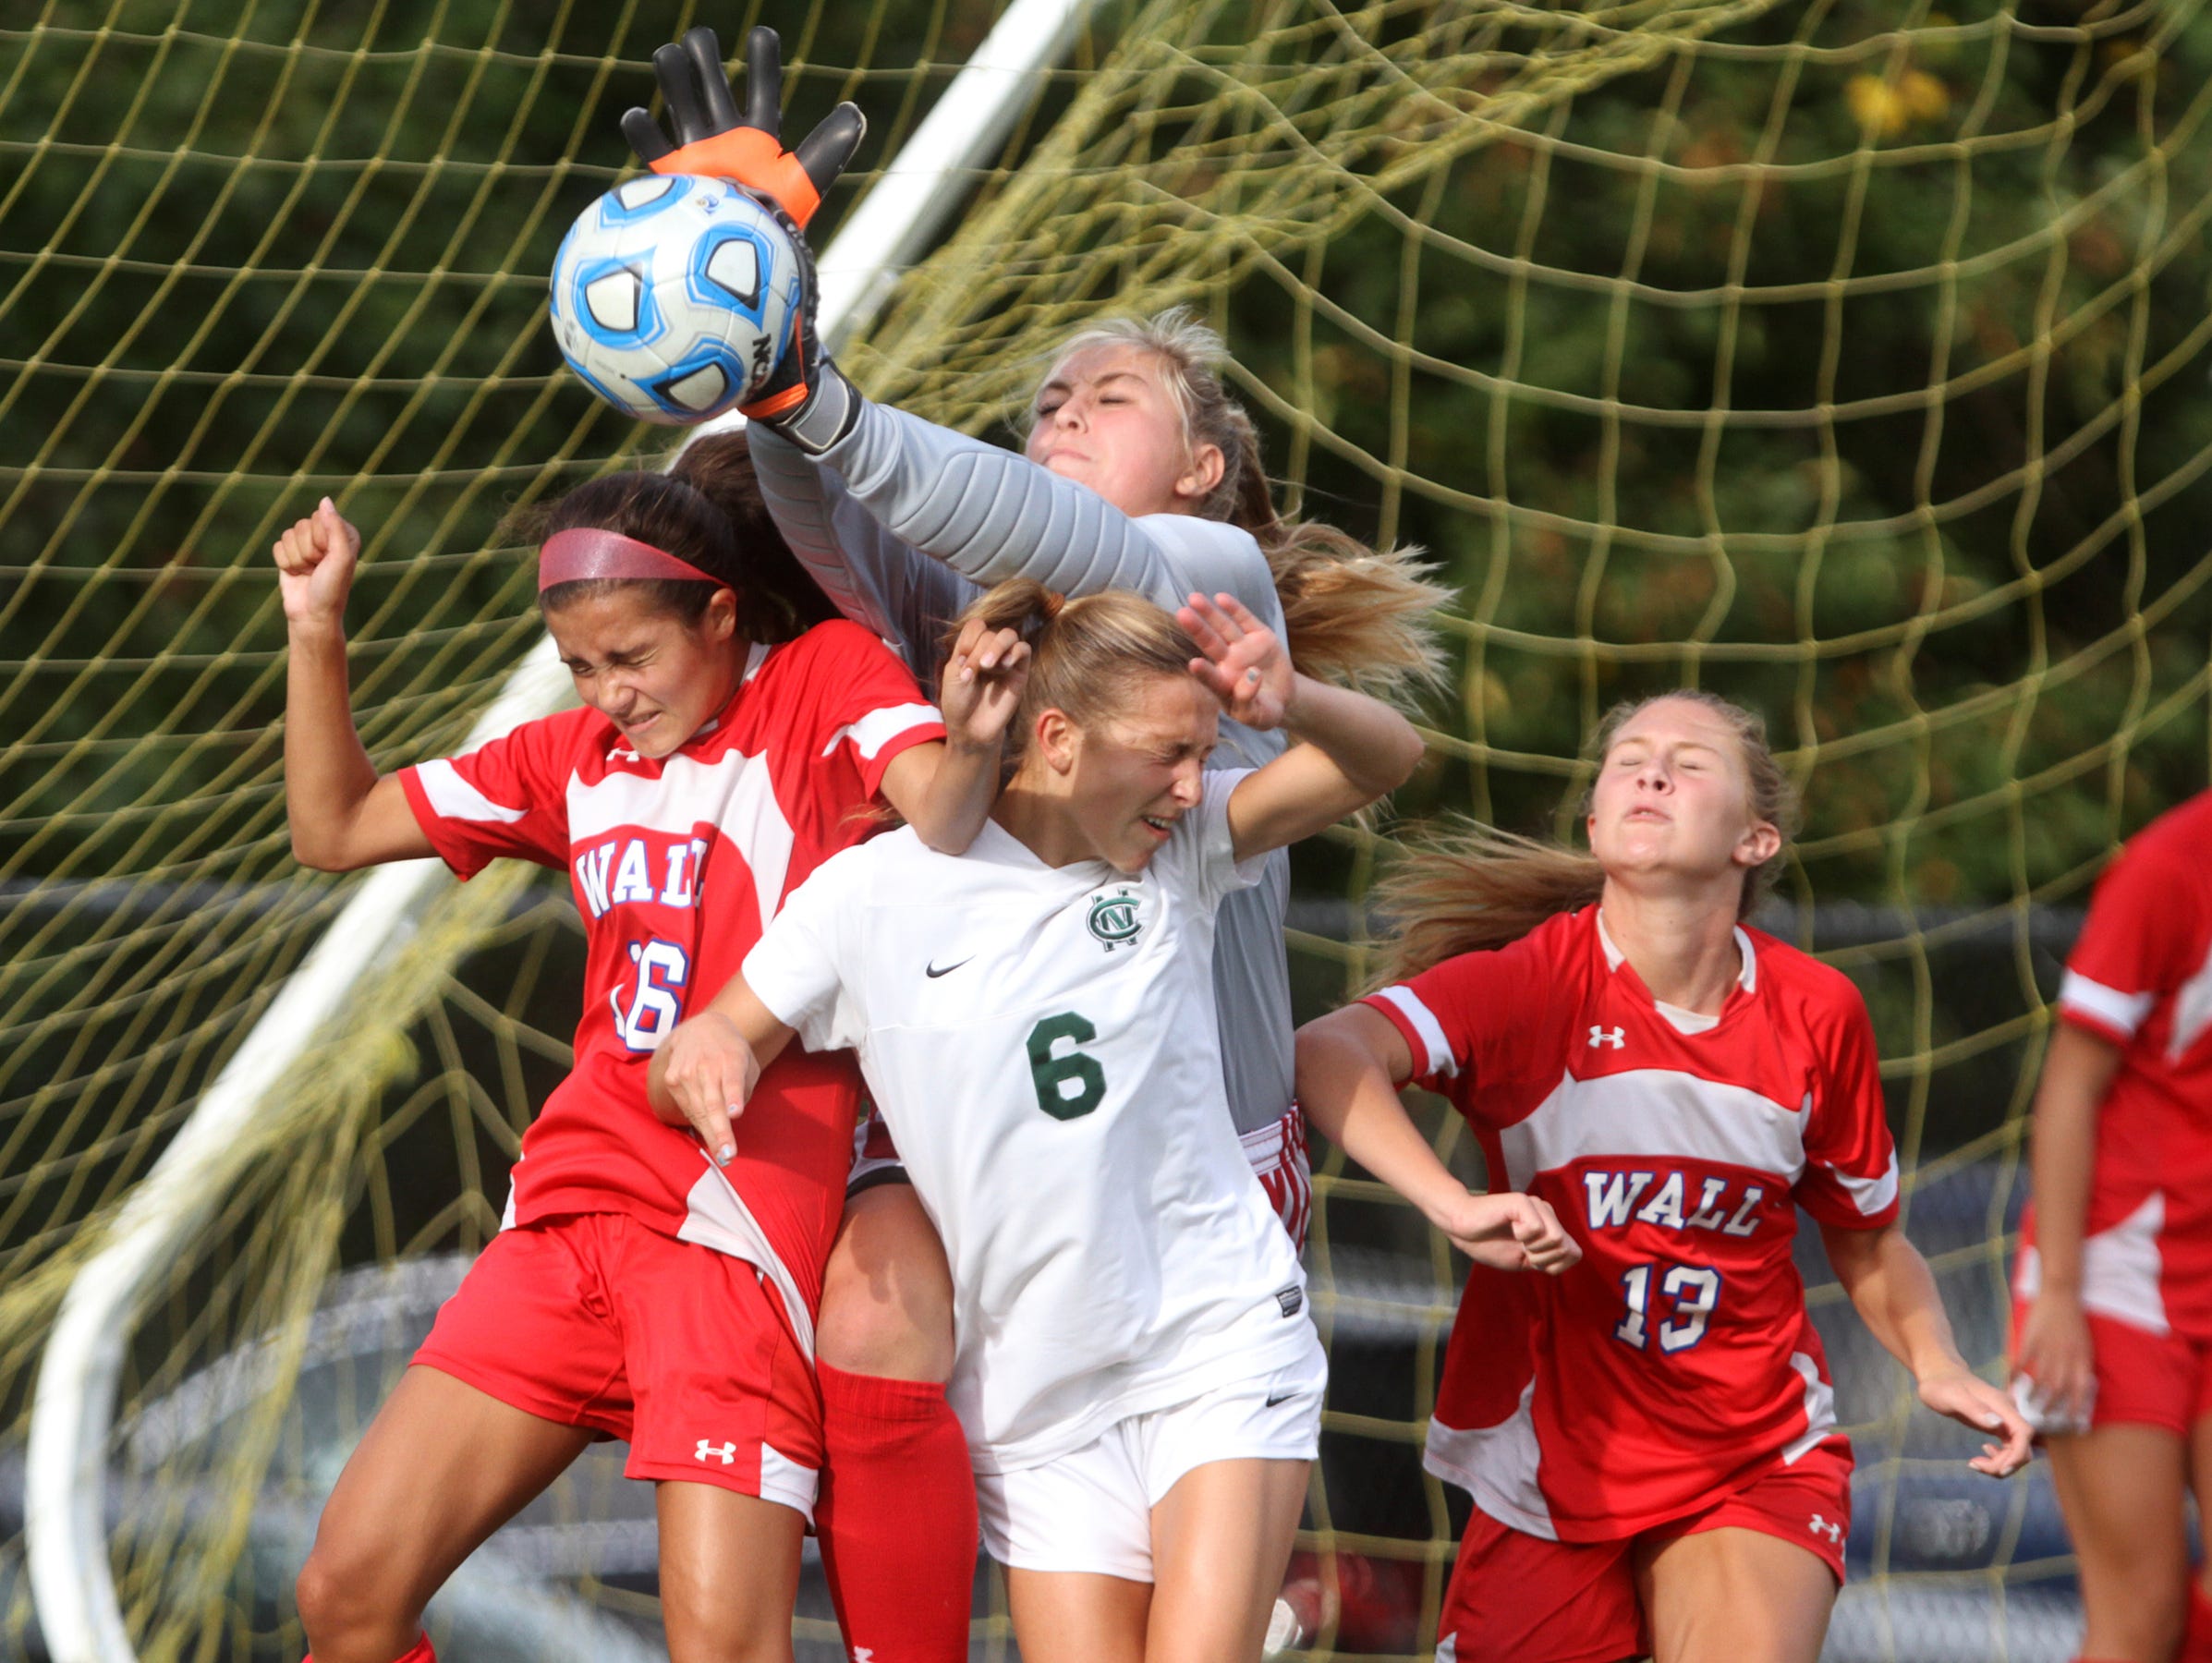 Wall goalie Alex Panasuk and teammates Kelsey Nies (16) and Jamie Iorio (13) defend a first-half corner kick intended for Colts Neck's Allison Russo (6), Wednesday, September 30, 2015, in Marlboro, NJ